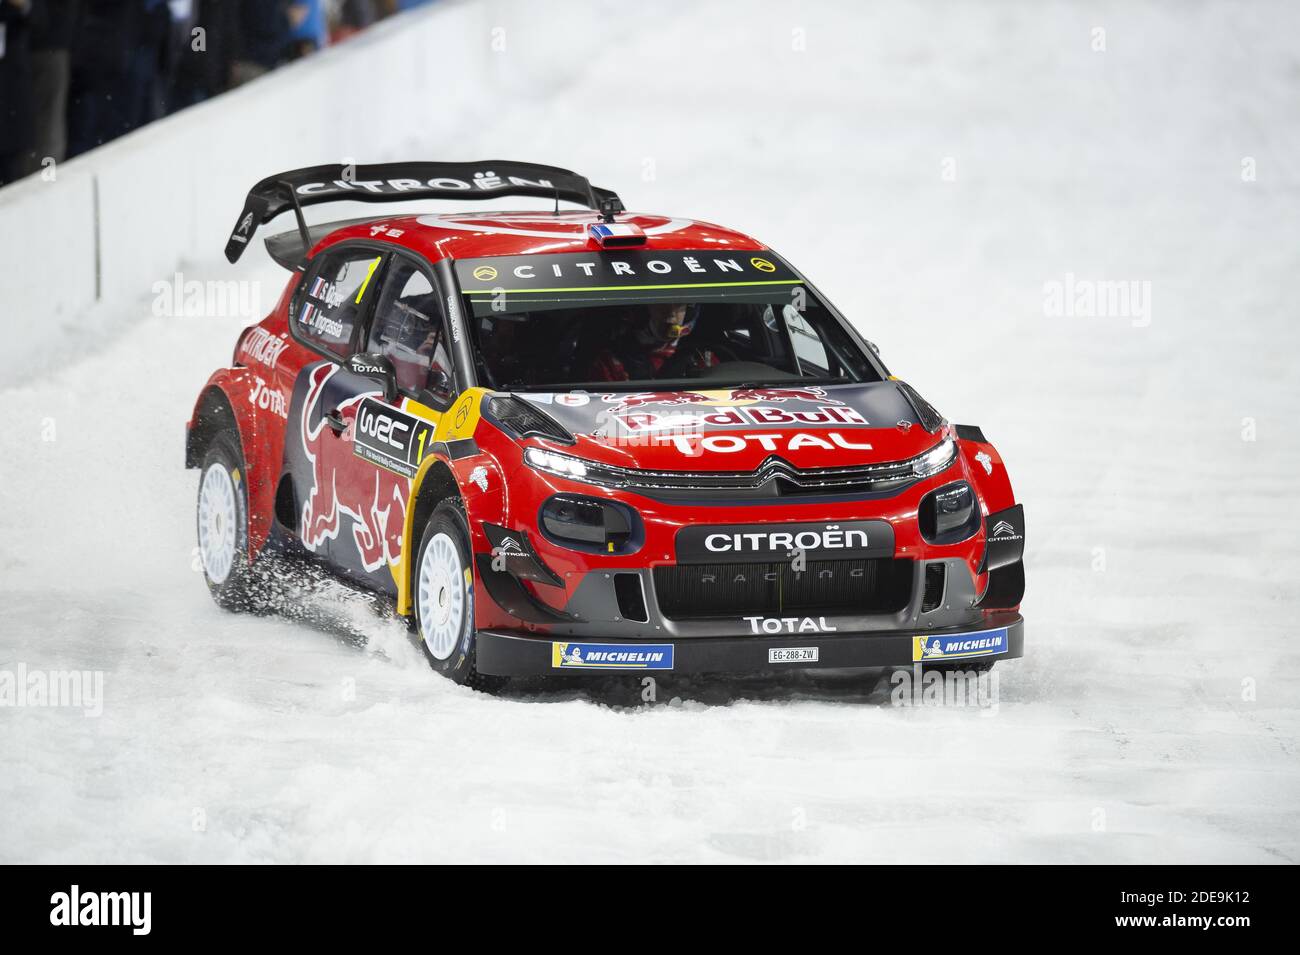 Sebastien Ogier with New Citroën C3 WRC 2019 during the Andros Trophy's  final round ice-race,